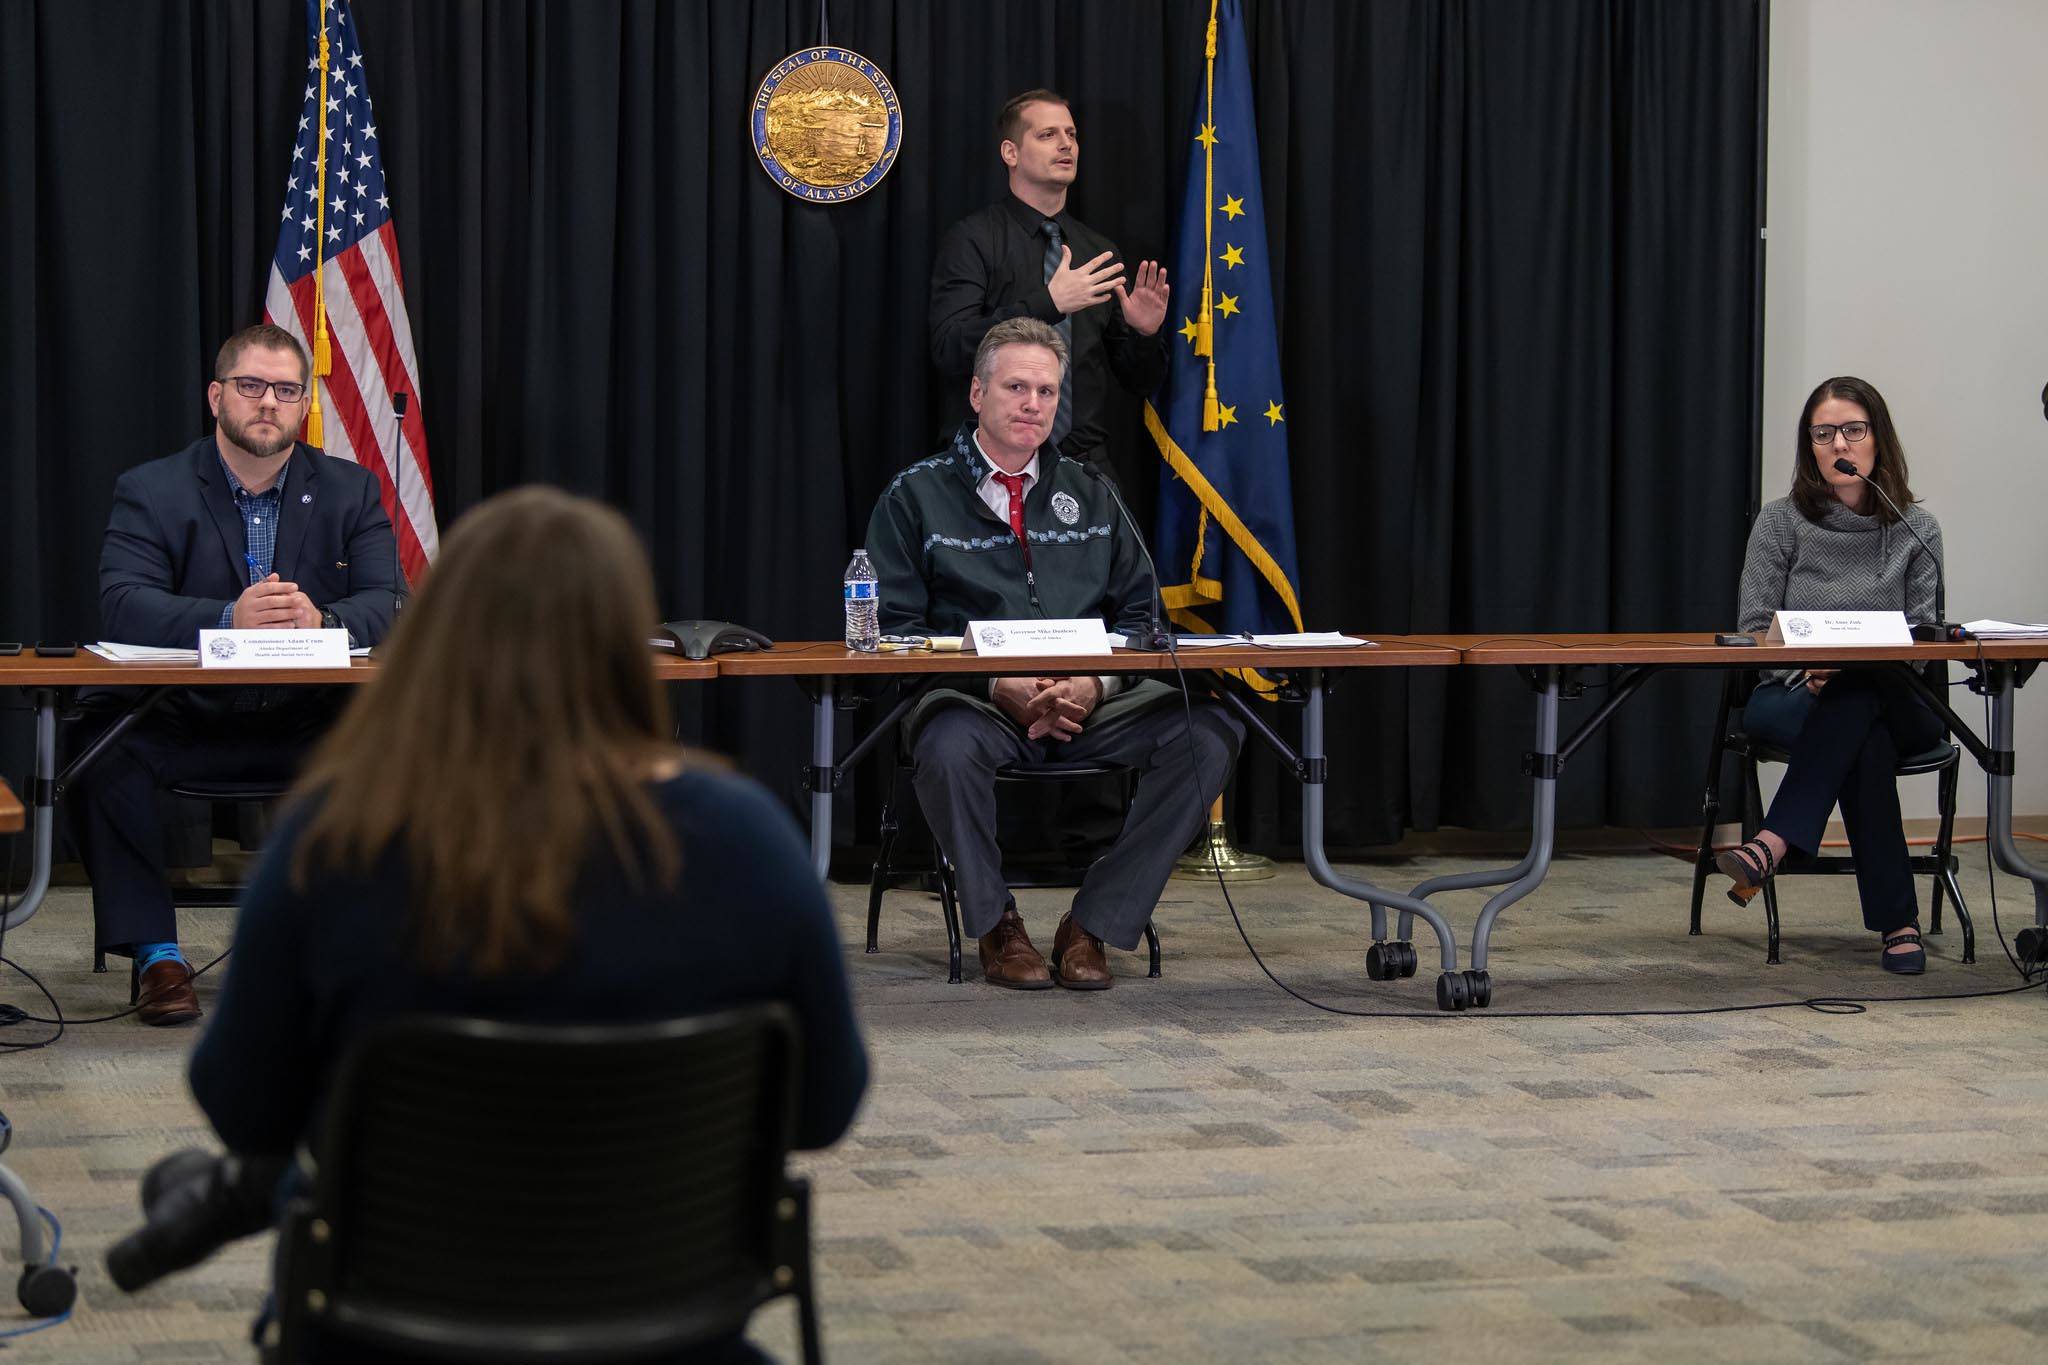 From left: DHSS Commissioner Adam Crum, Gov. Mike Dunleavy, Chief Medical Officer Dr. Anne Zink participate in a press conference on the COVID-19 pandemic on Wednesday, March 25, 2020. (Photo courtesy Office of Gov. Mike Dunleavy)